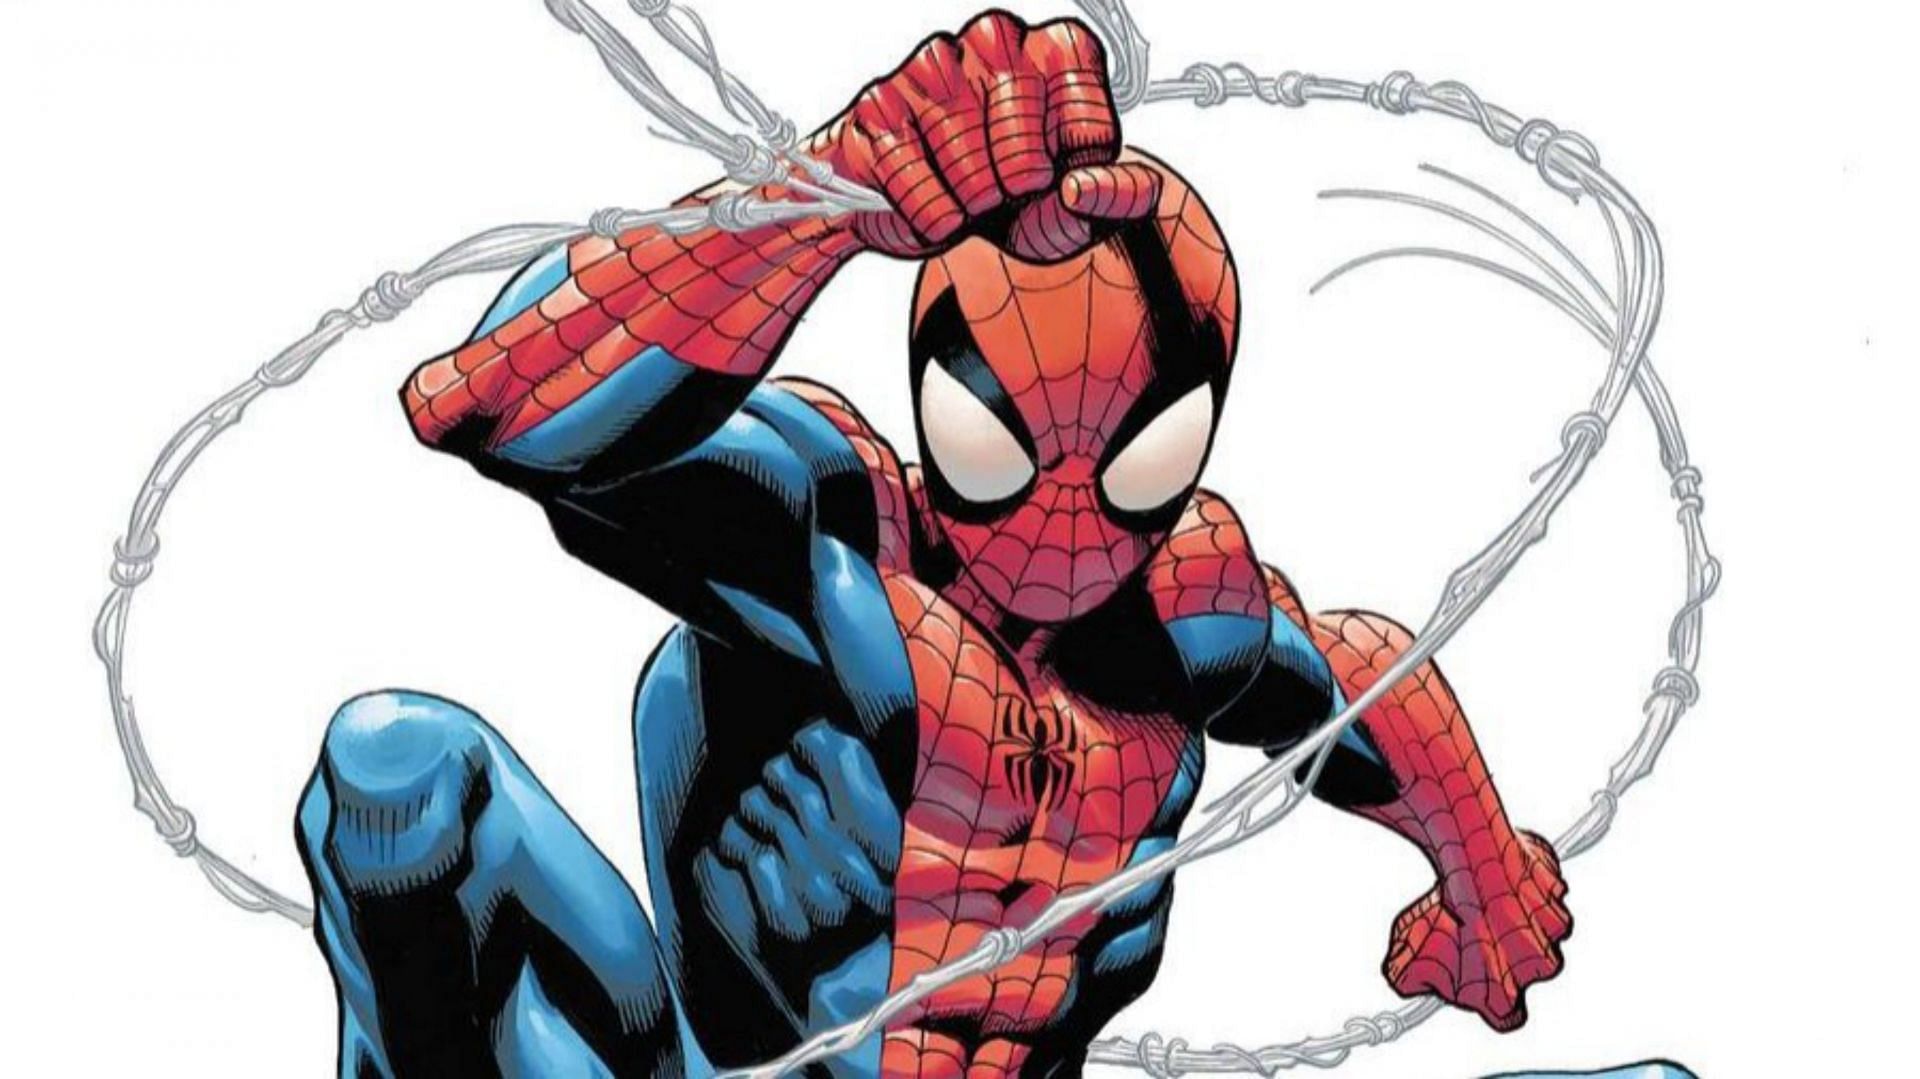 Is Marvel ending Spider-Verse in comics? Dan Slott and Mark Bagley bring new  Spider-Man series in October, affecting fate of multiverse